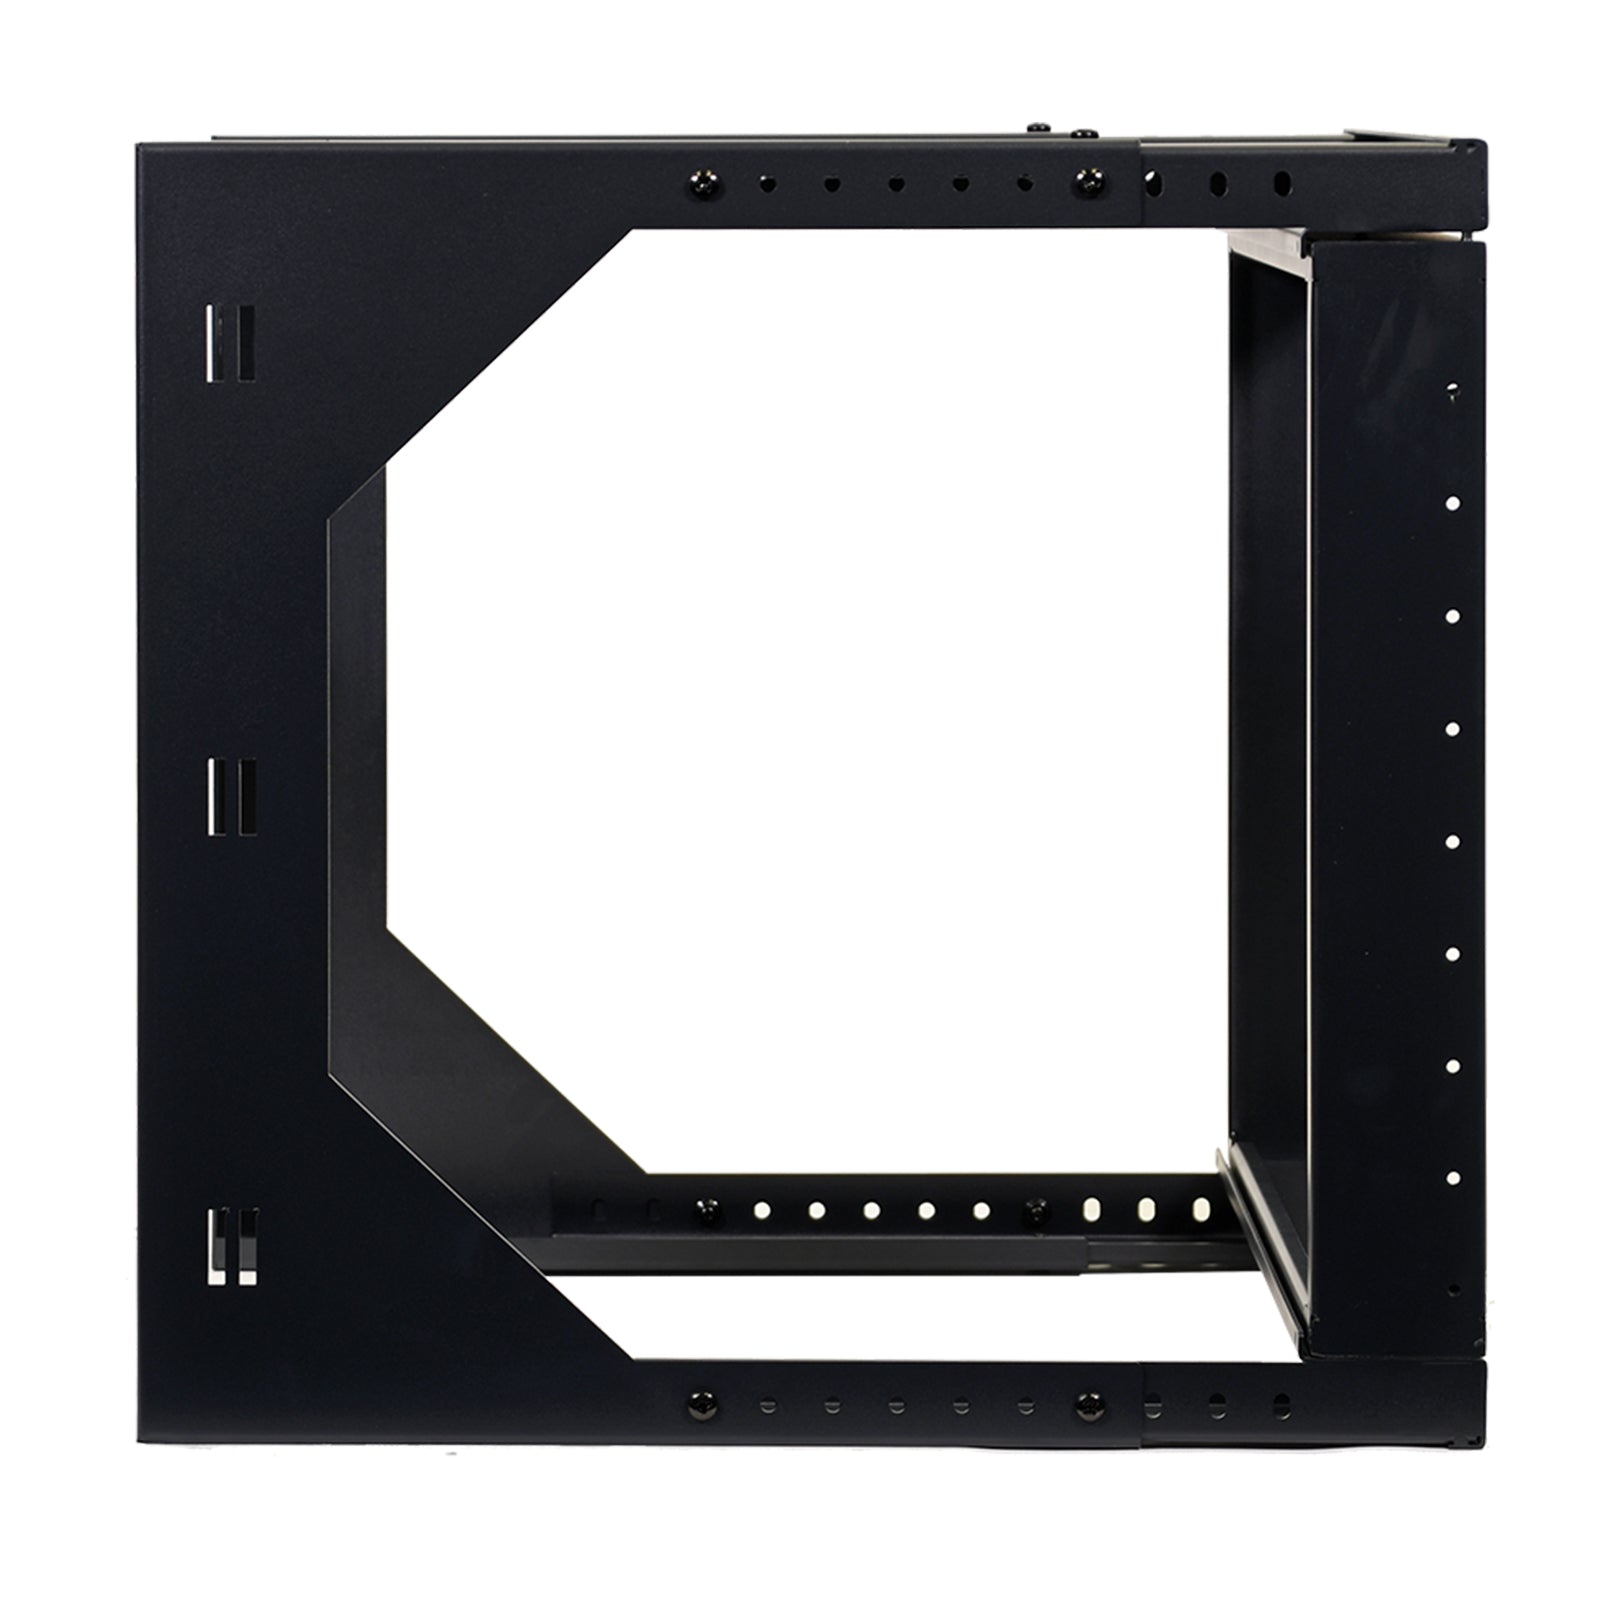 Aeons SBC Seires 6U Wall-Mount Open-Frame Rack, Adjustable-Depth, Swing Out Hinged Gate